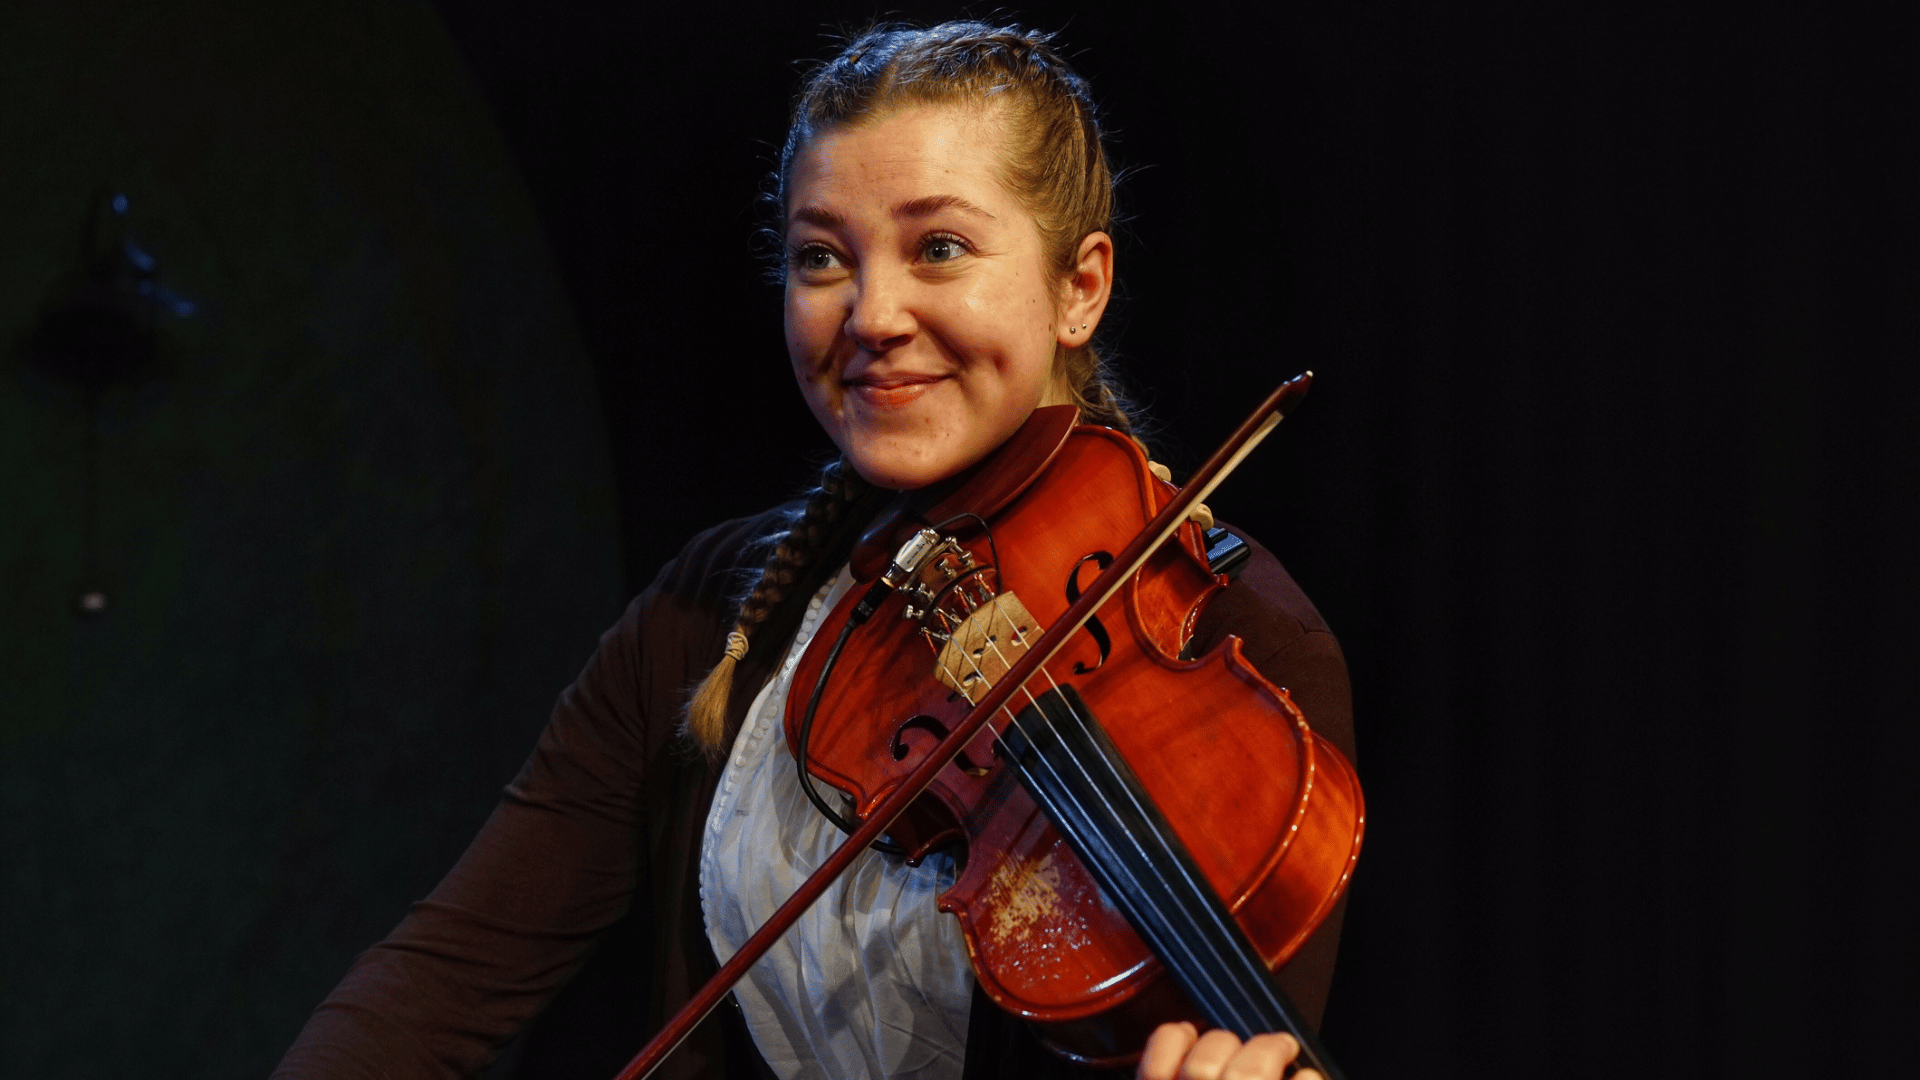 A woman smiling while playing a violin.